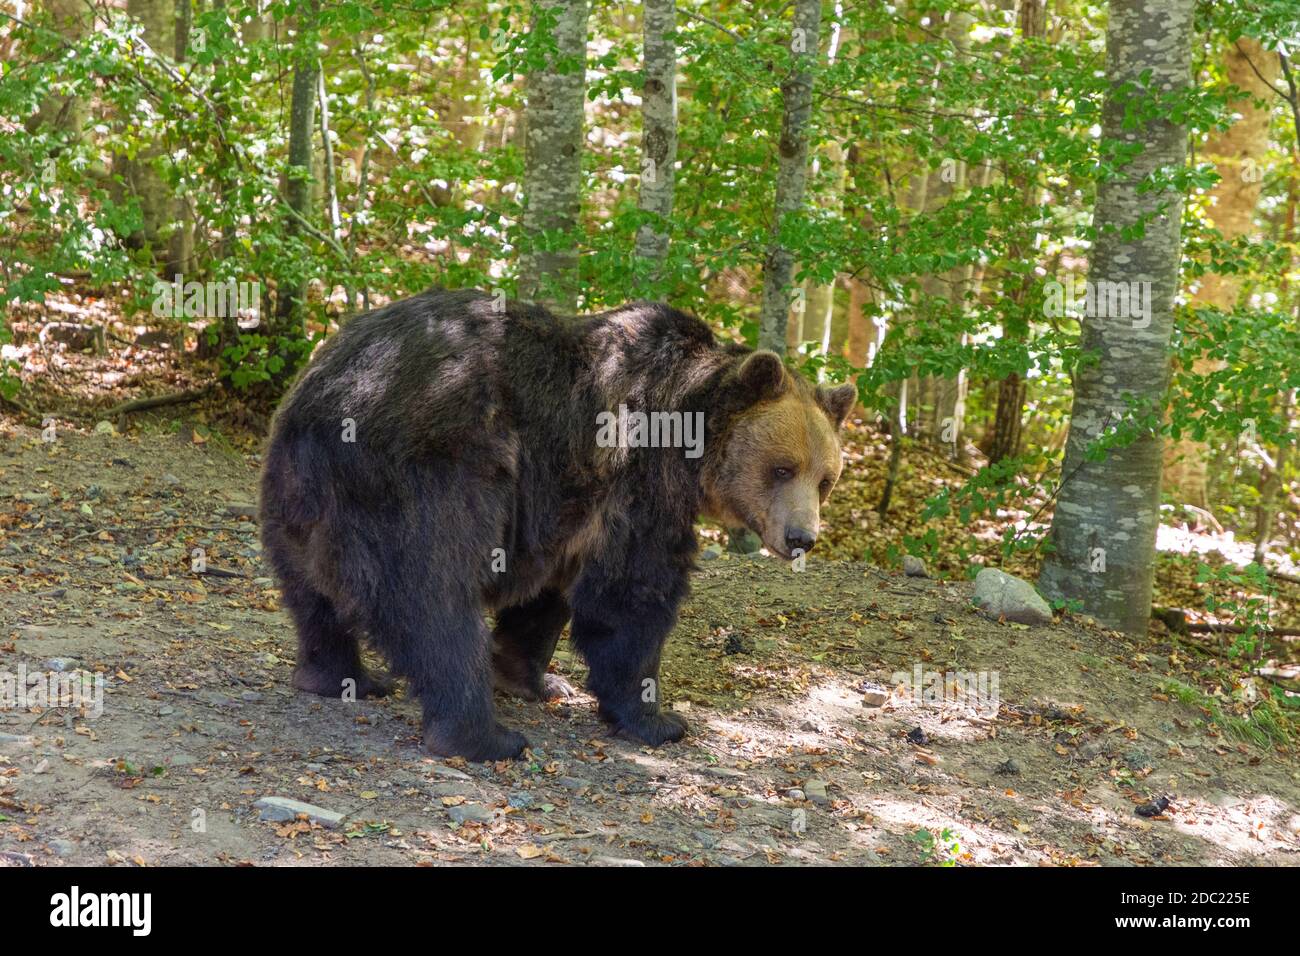 Big brown bear in a forest. European, environment. Stock Photo